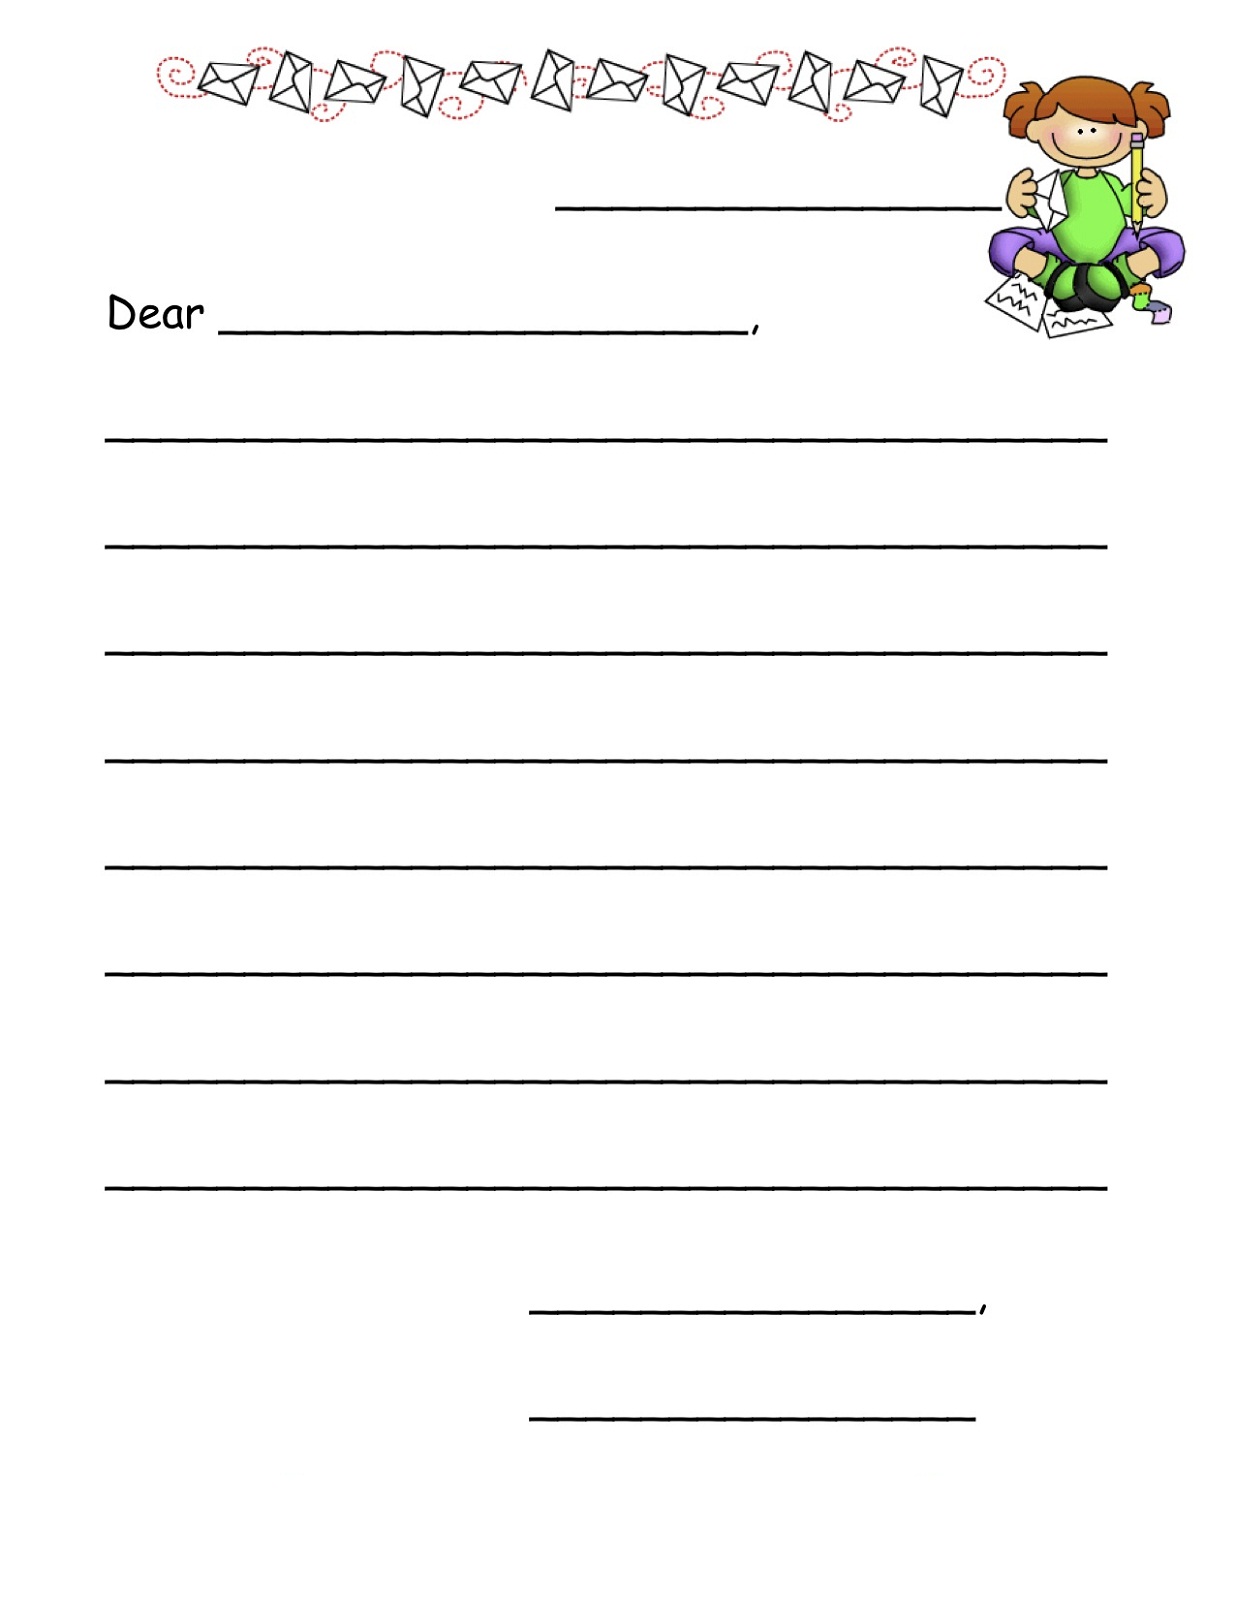 lined-paper-for-kids-activity-shelter-25-free-lined-paper-templates